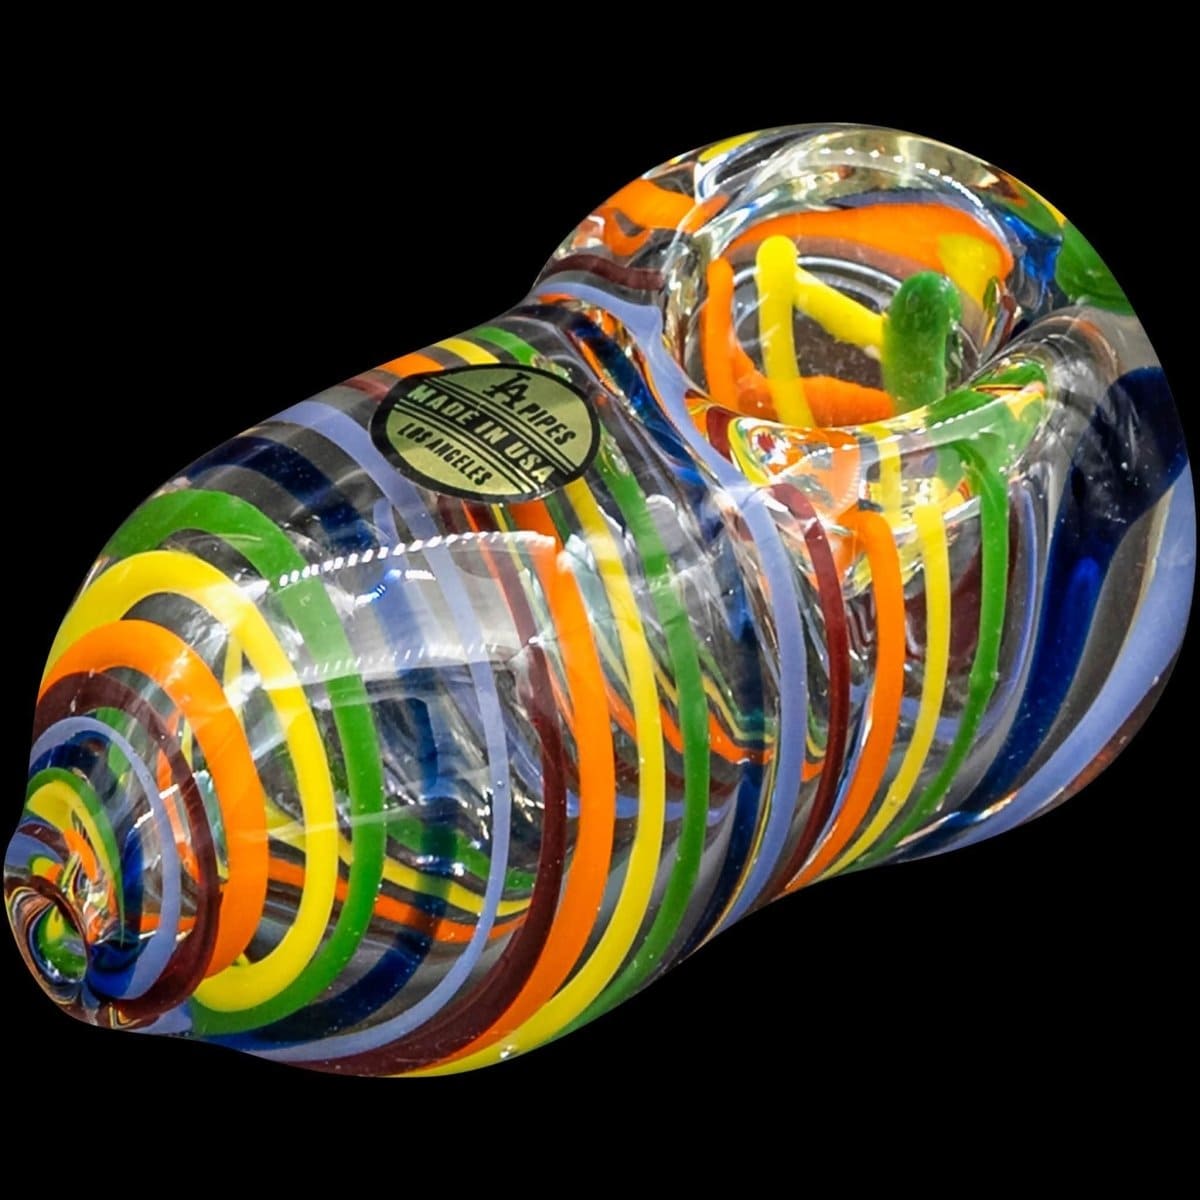 LA Pipes Hand Pipe "Easter Egg" Rainbow Swirl Heavy Egg-Shaped Pipe